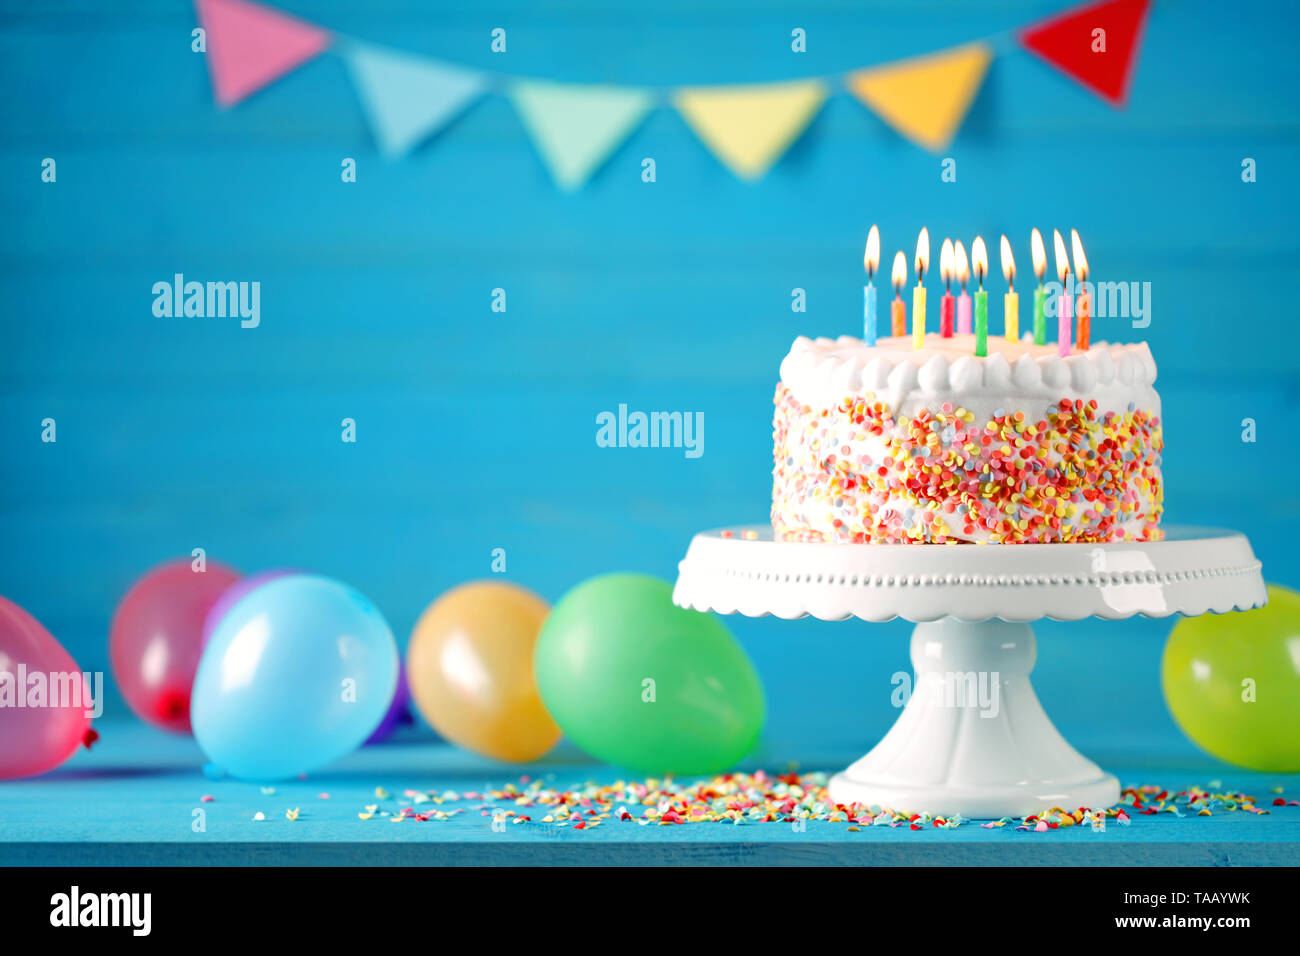 Happy birthday cake with colorful balloons decoration. Birthday card. Stock Photo